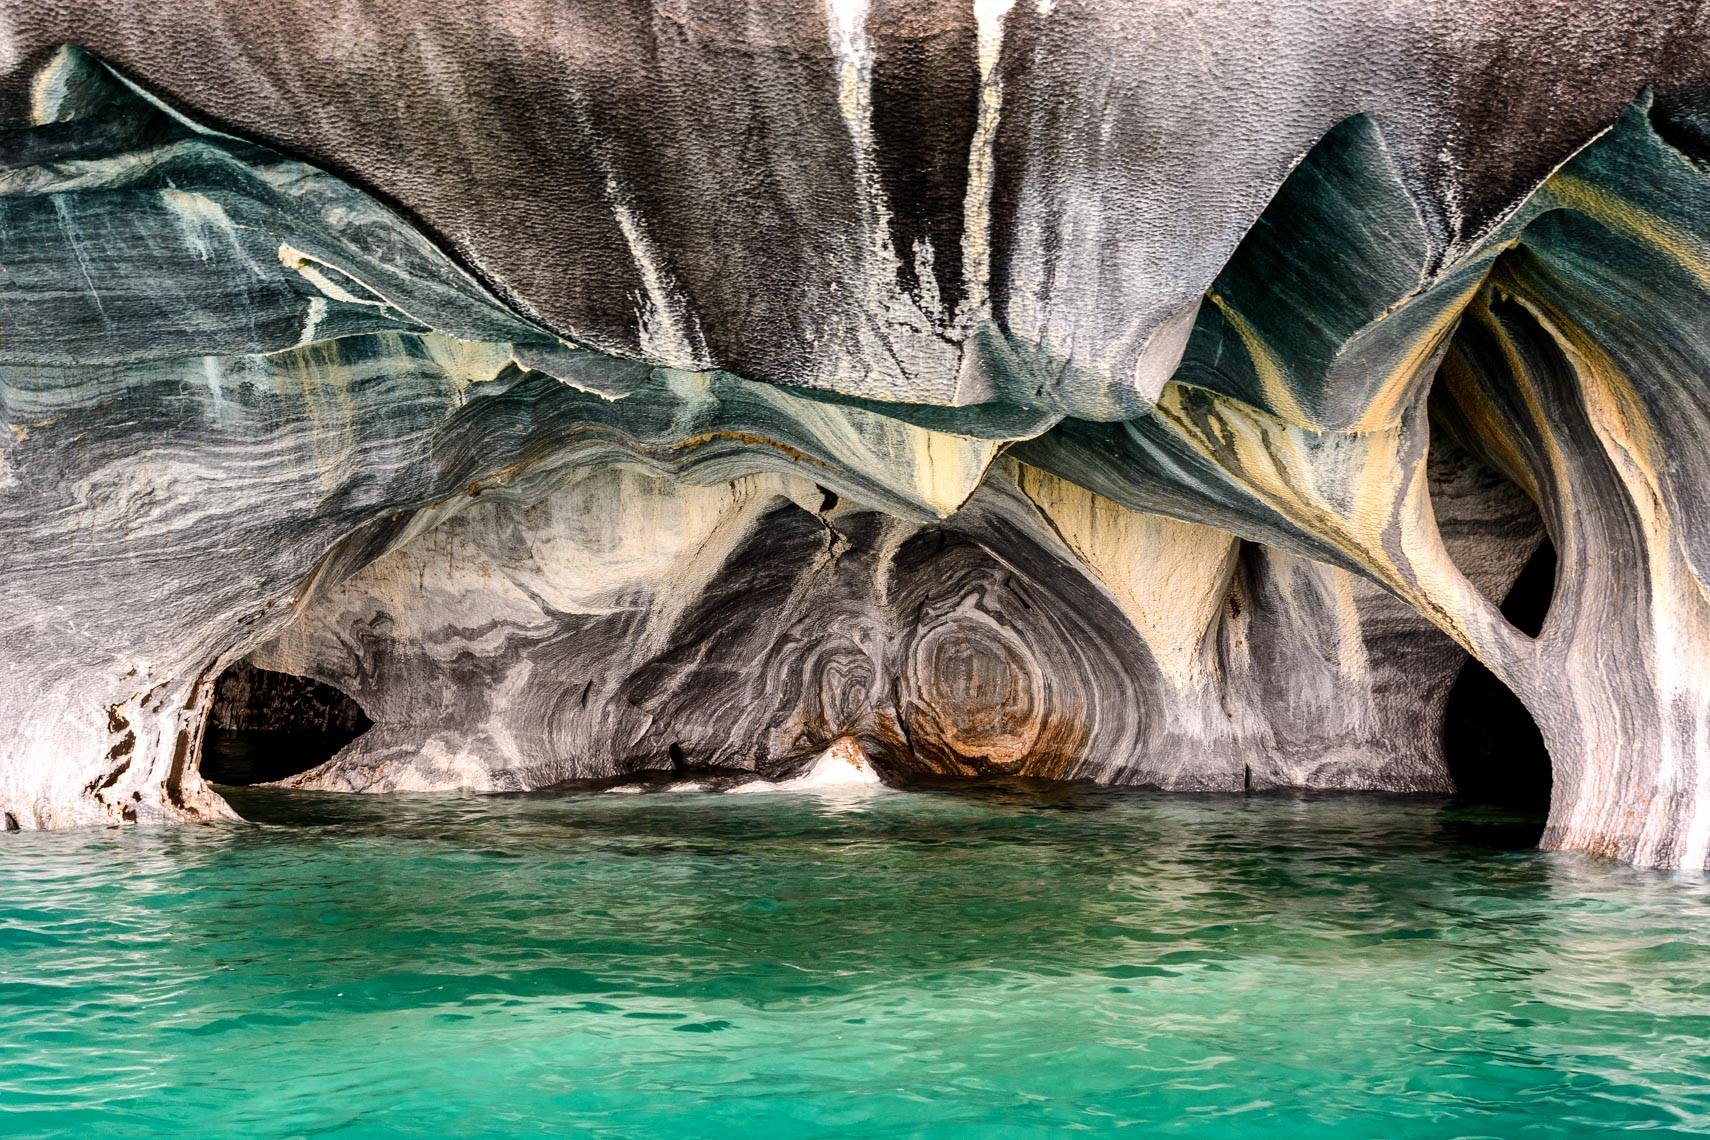 Marble Caves